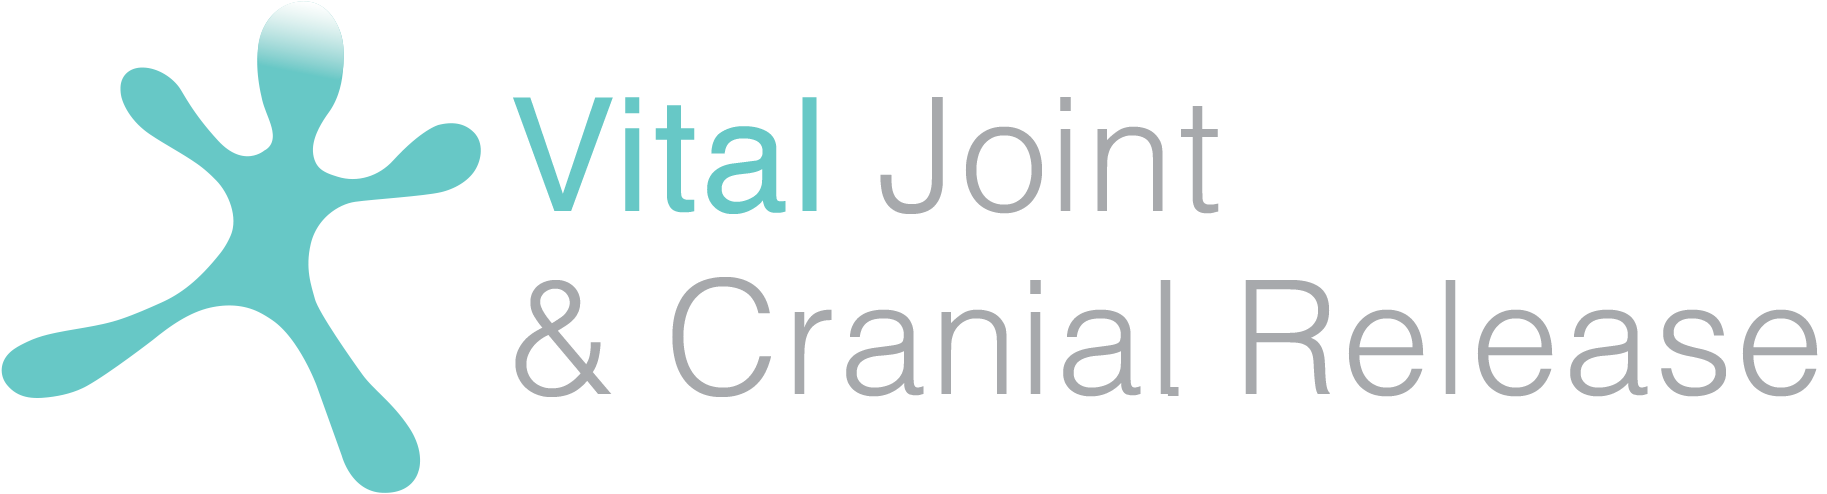 Vital Joint and Cranial Release, Becky Knott